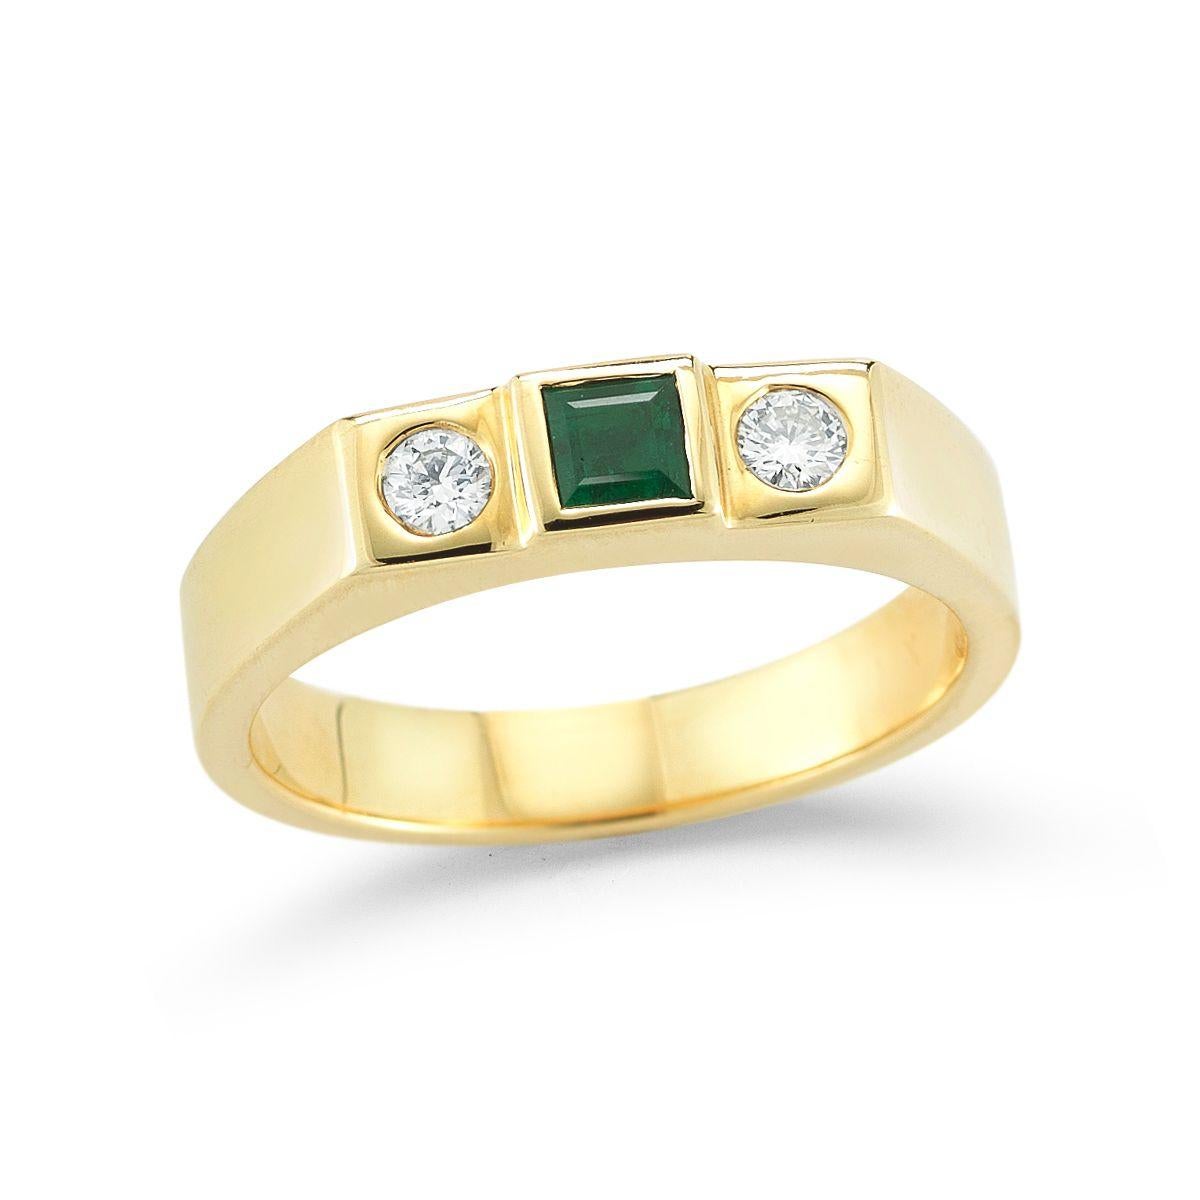 EMERALD AND DIAMOND RING
A clean and simple treatment for a man or womans finger.
Item: # 02007
Metal: 14k Y
Color Weight: 0.34 ct.
Diamond Weight: 0.26 ct.